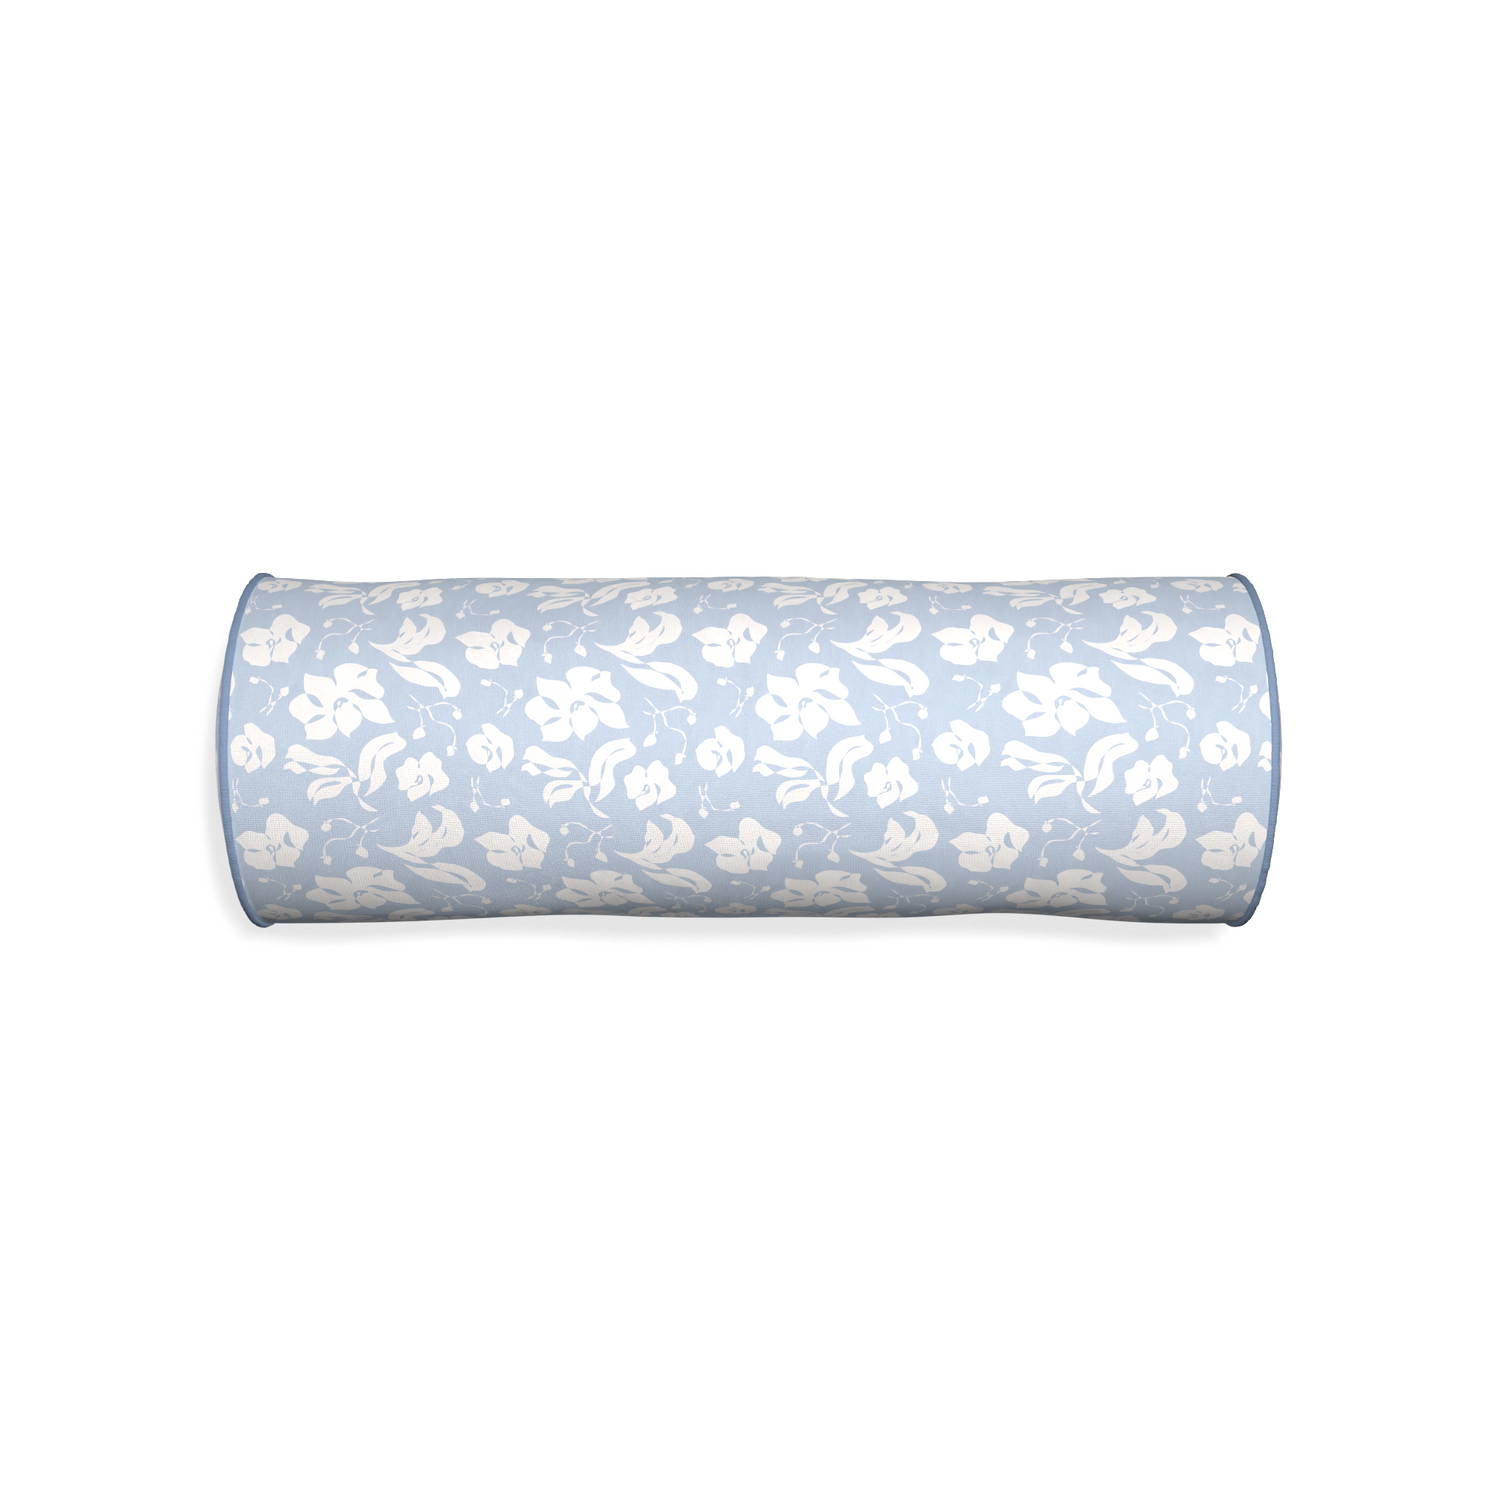 Bolster georgia custom cornflower blue floralpillow with sky piping on white background